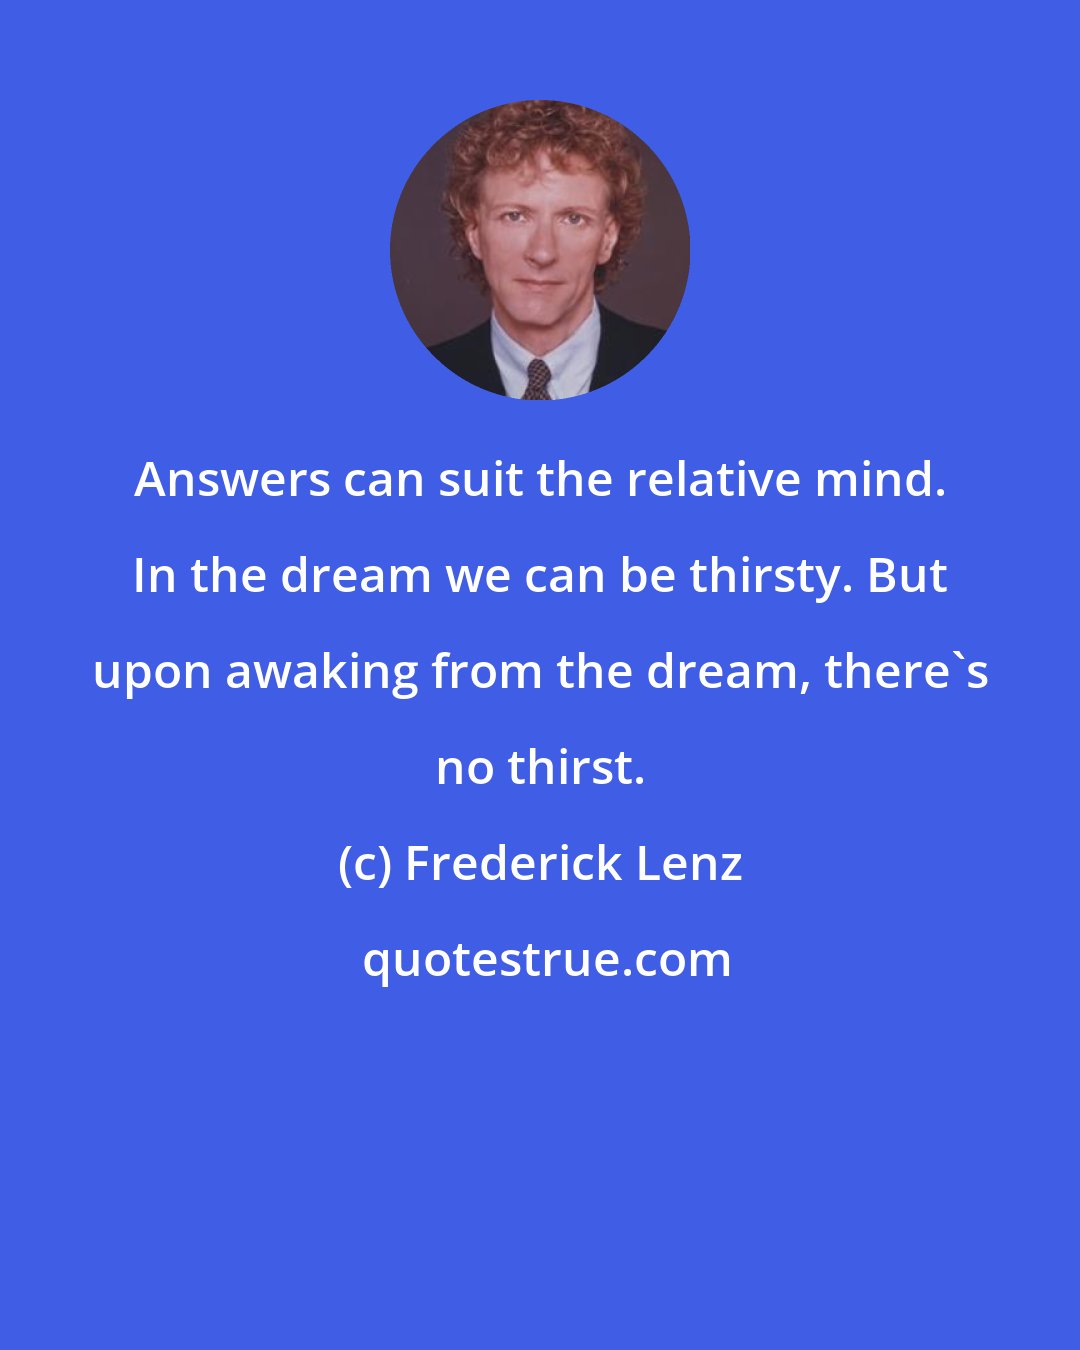 Frederick Lenz: Answers can suit the relative mind. In the dream we can be thirsty. But upon awaking from the dream, there's no thirst.